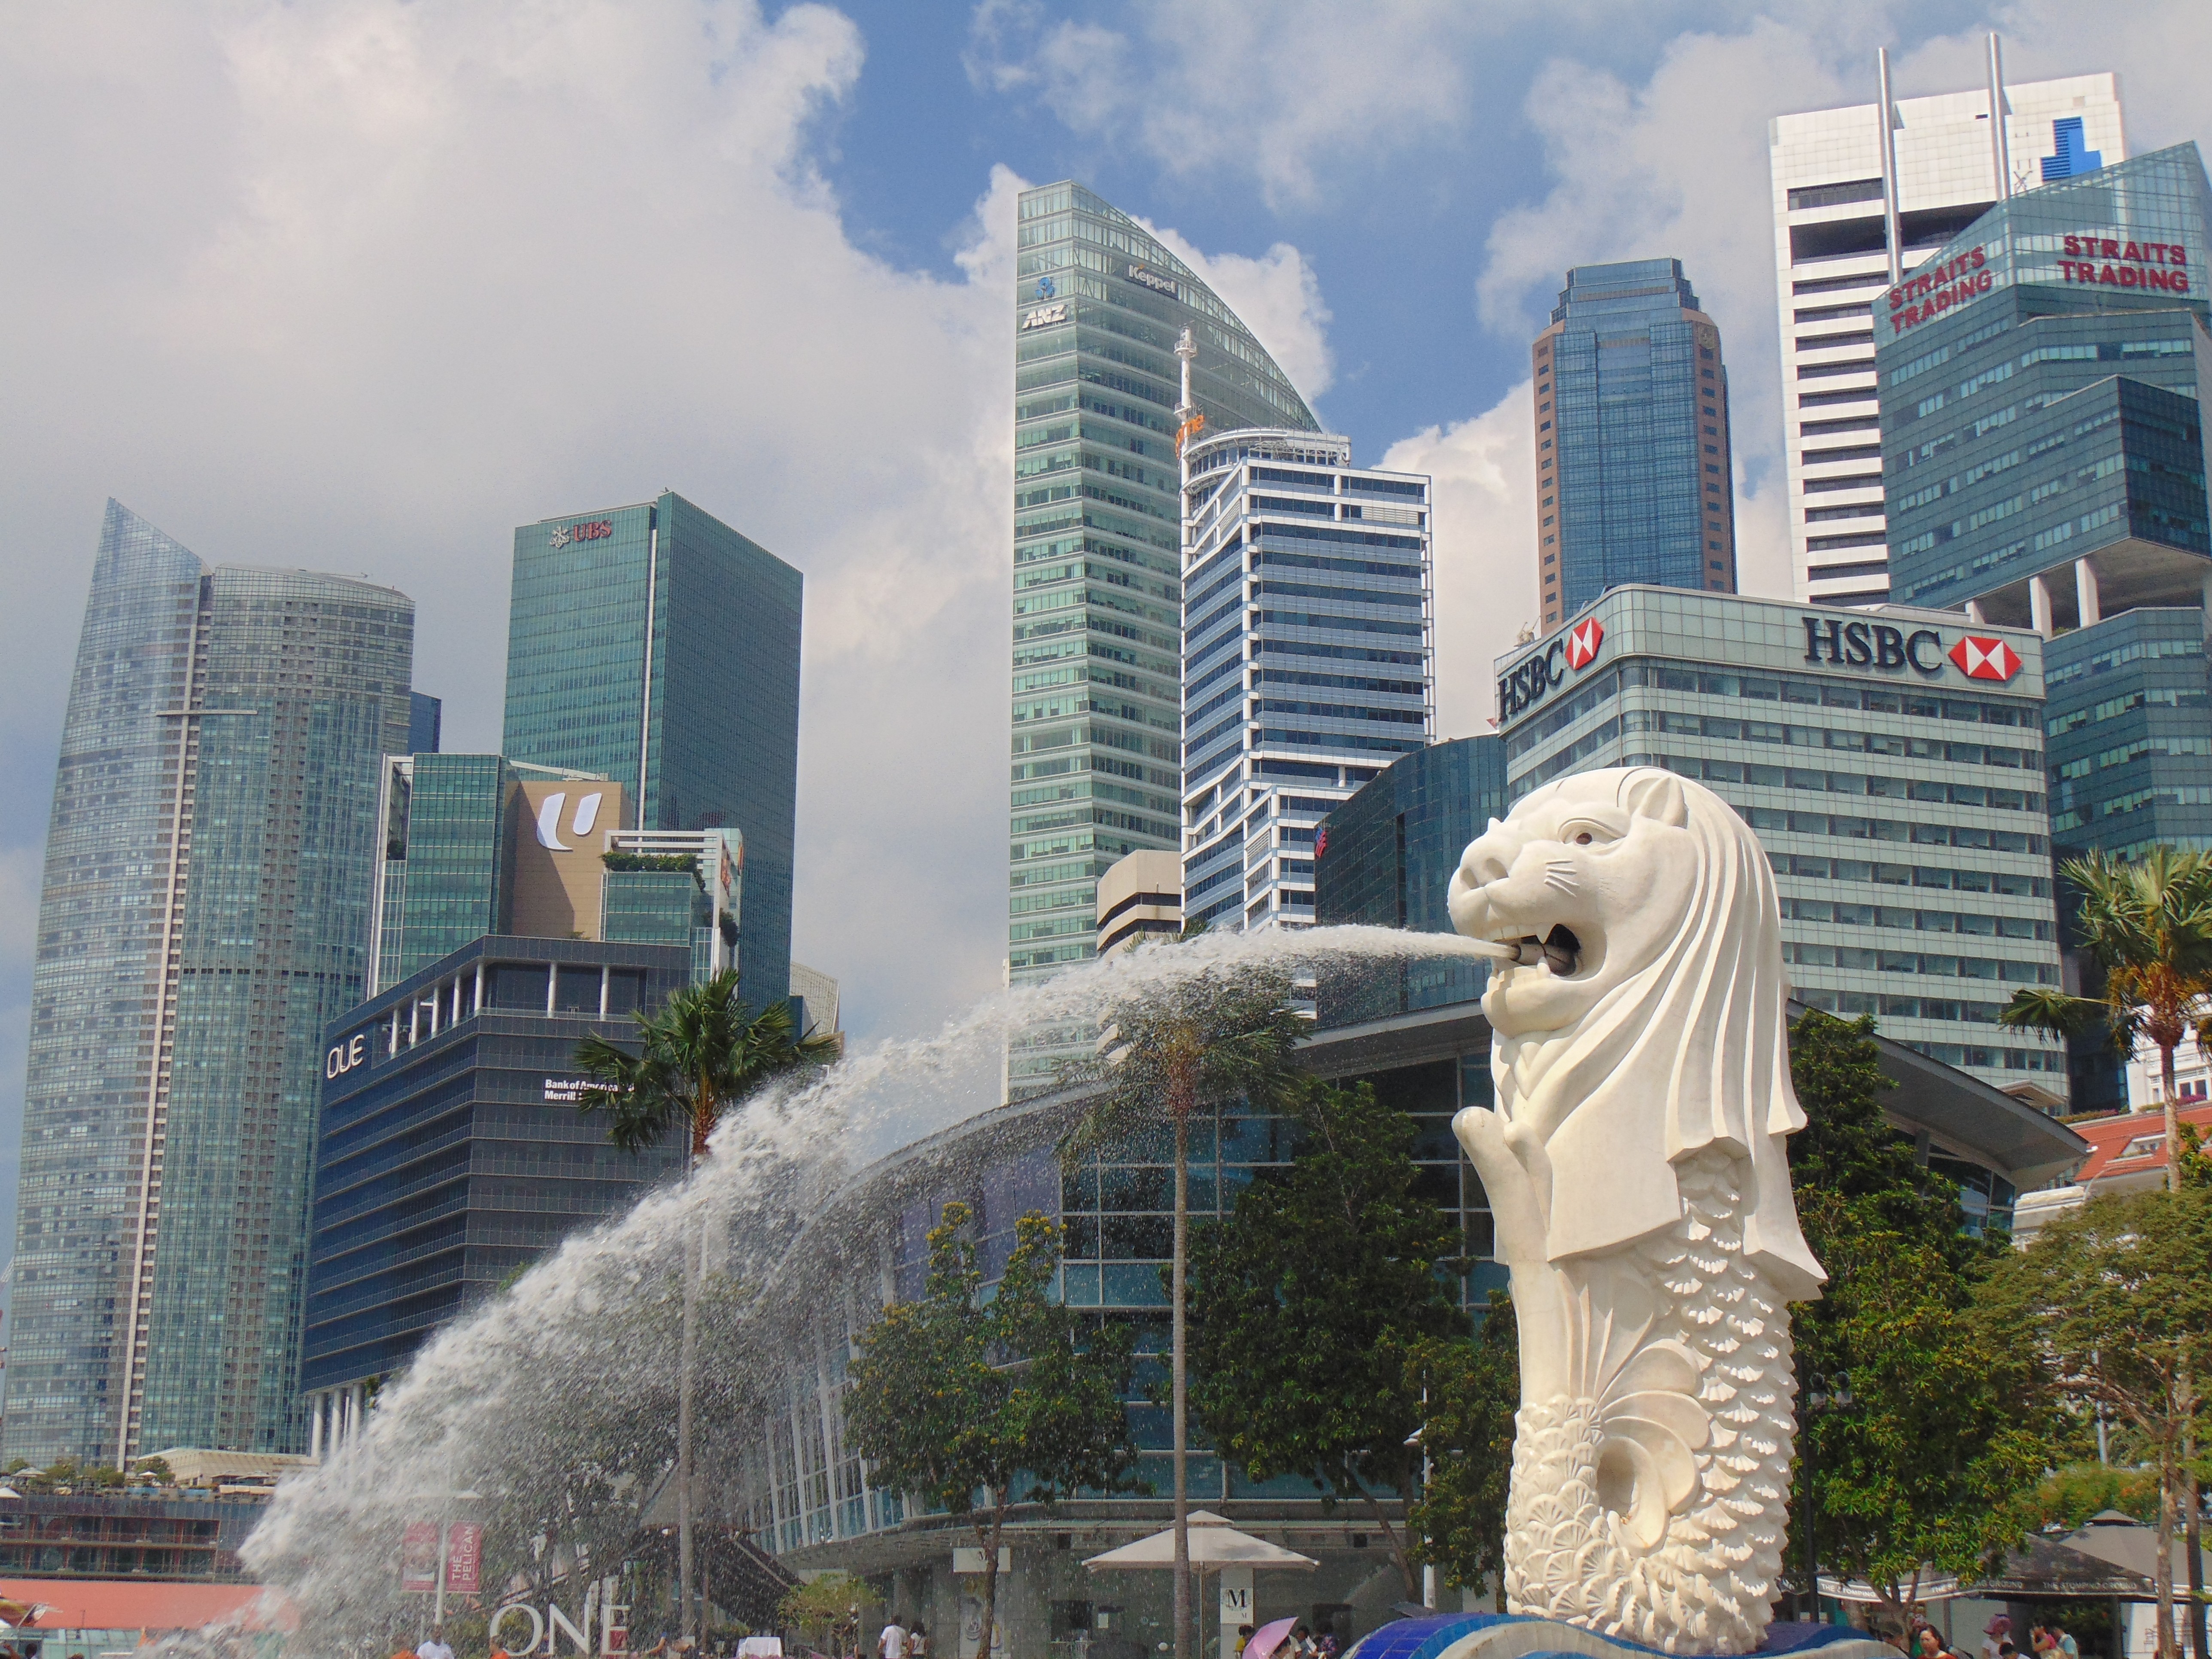 The BBC’s Nicholas Walton takes a walk across Singapore that allows him to paint an engaging picture of the city state, but when it comes to politics he pulls his punches